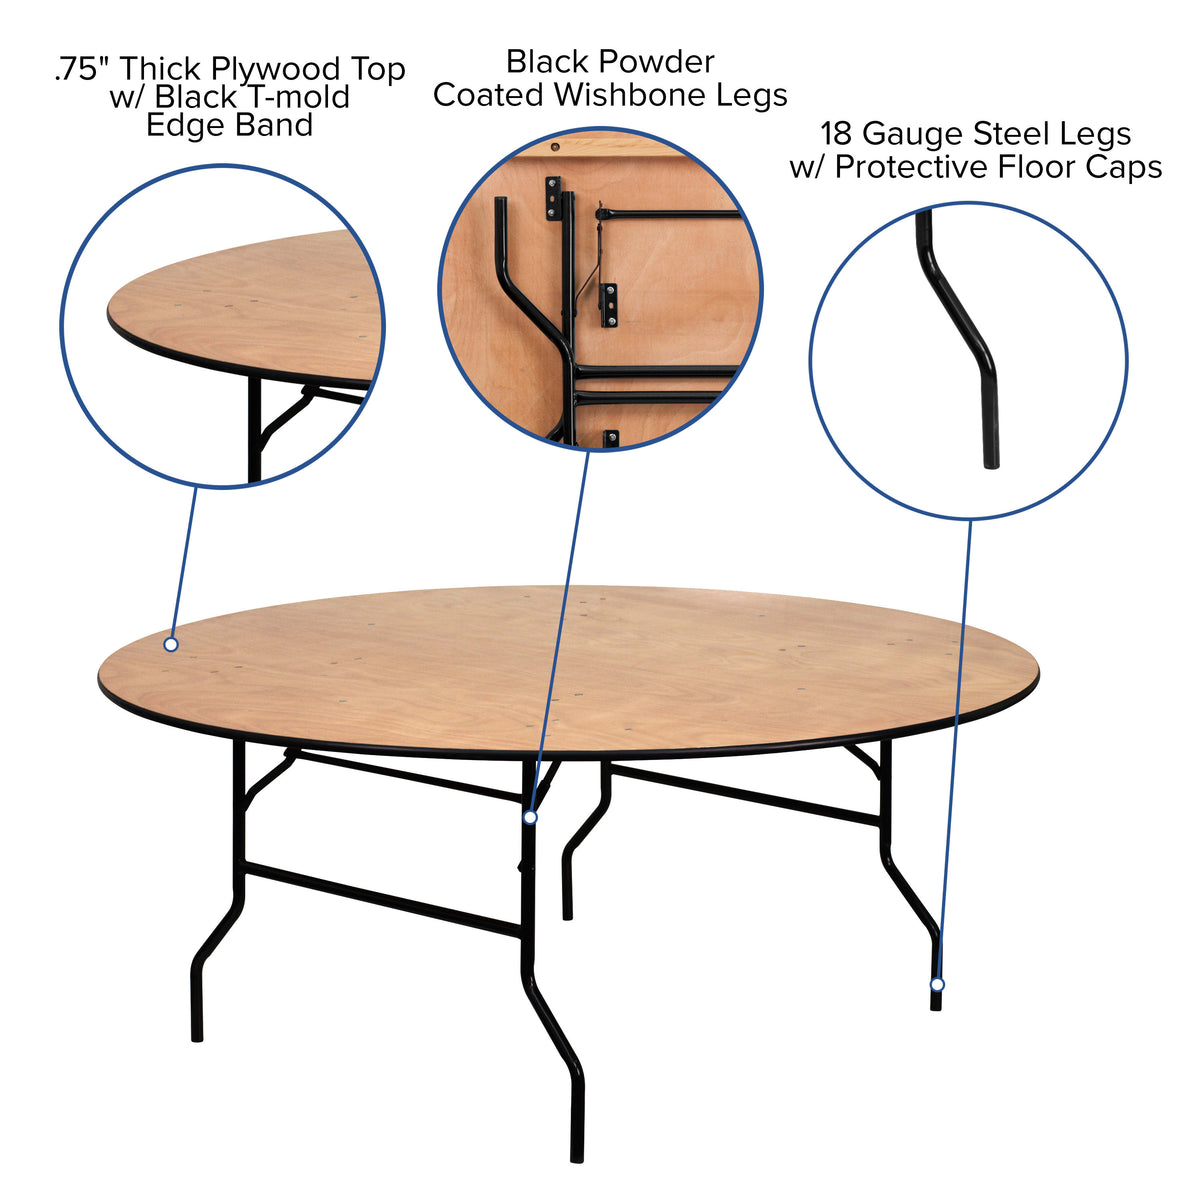 6-Foot Round Wood Folding Banquet Table with Clear Coated Finished Top